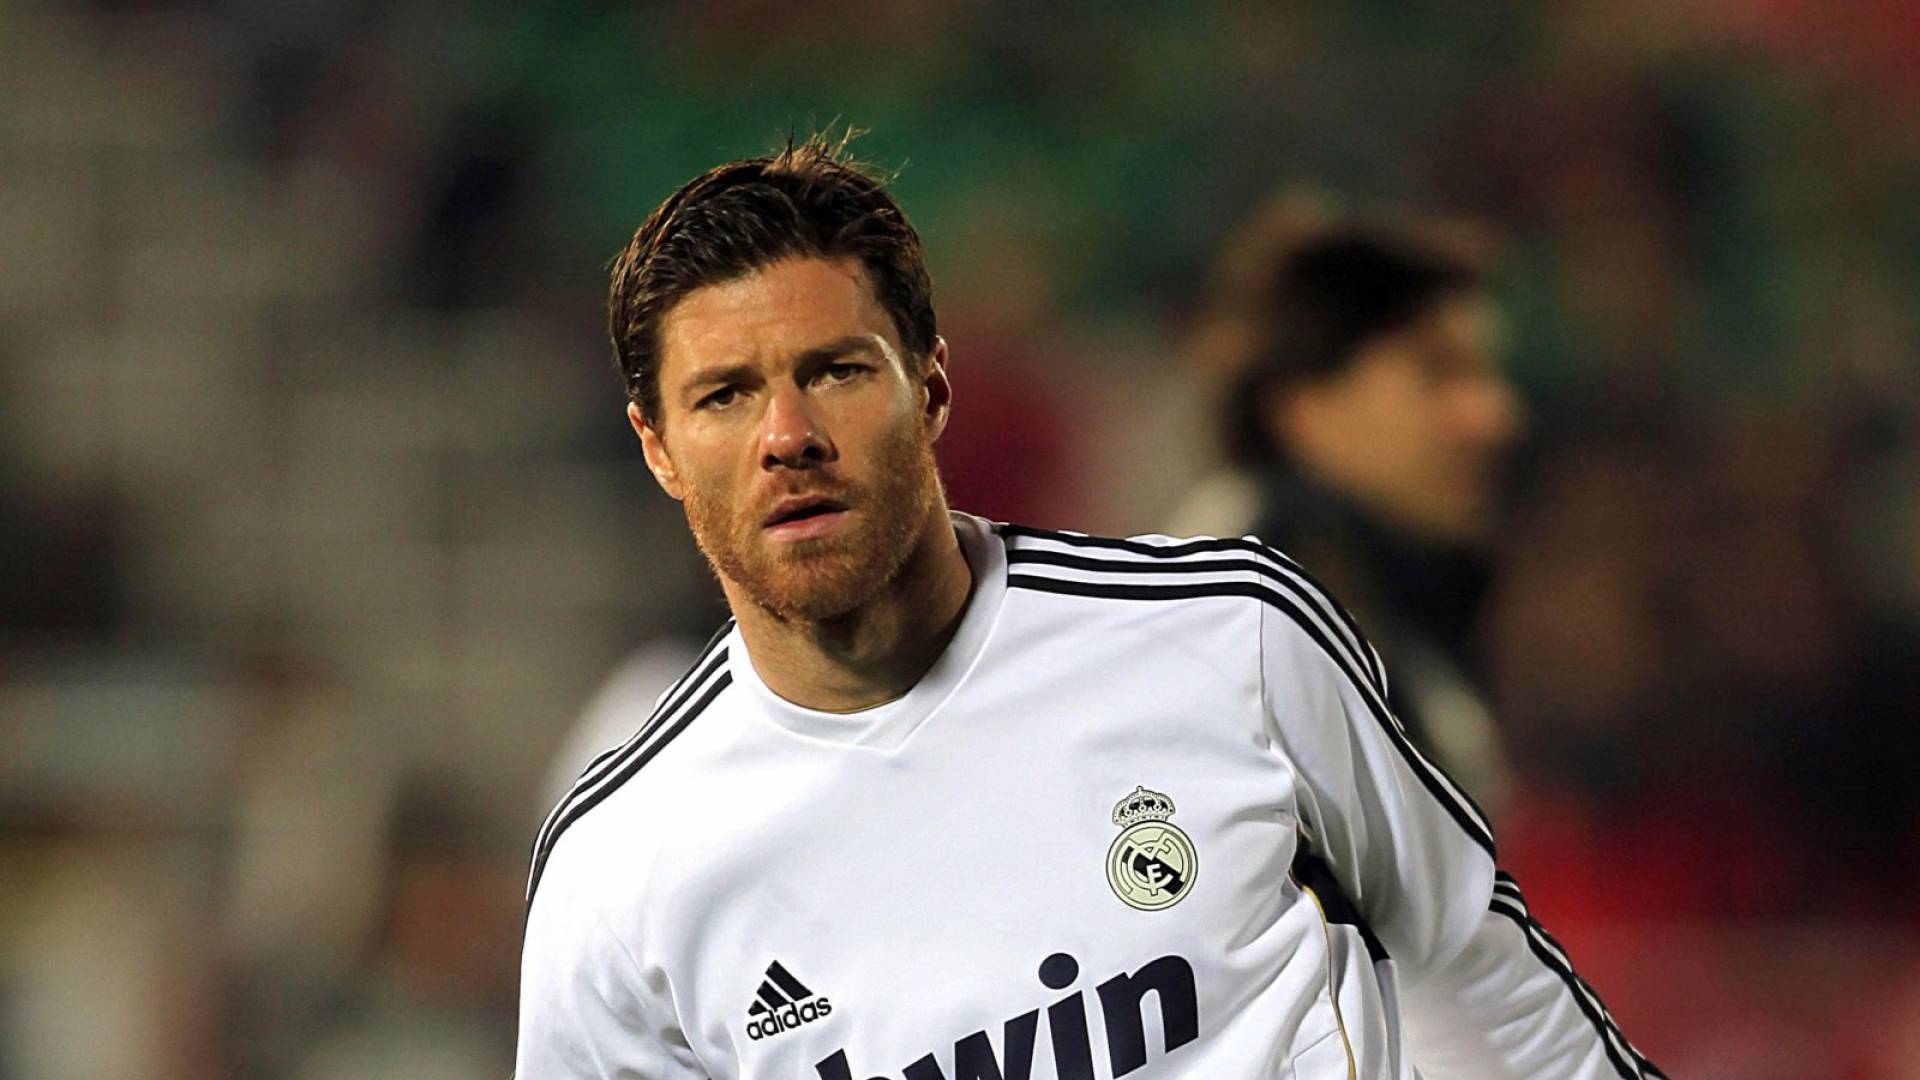 xabi alonso real madrid 2014. Desktop Background for Free HD